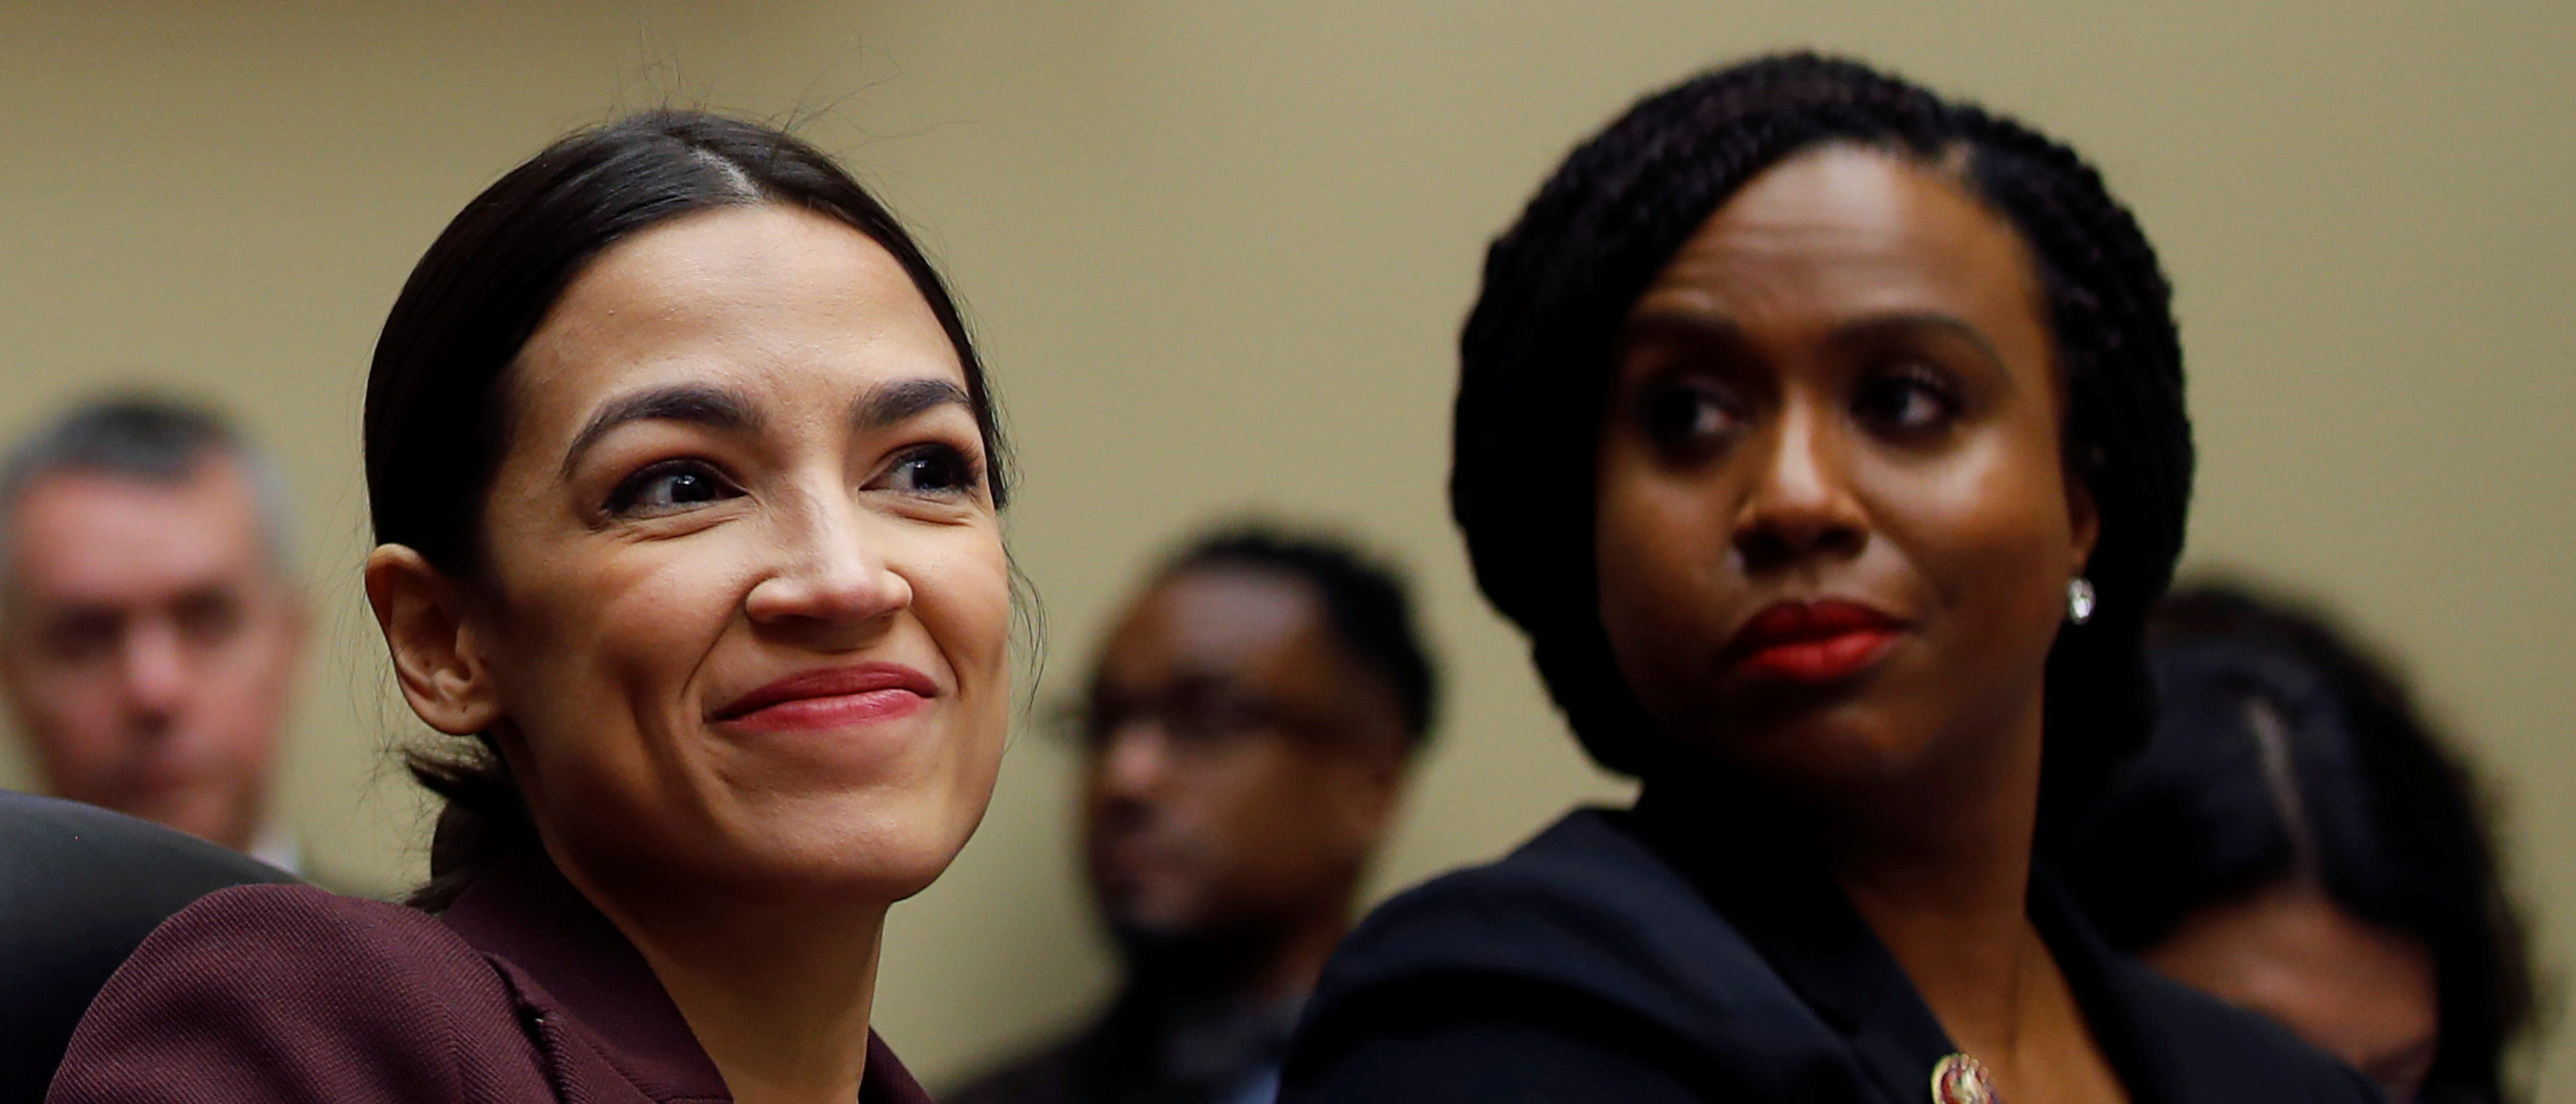 U.S. Rep. Alexandria Ocasio-Cortez (D-NY) and Rep. Ayanna Pressley (D-MA) listen to the testimony of former Trump personal attorney Michael Cohen at a House Committee on Oversight and Reform hearing on Capitol Hill in Washington, U.S., February 27, 2019. REUTERS/Carlos Barria